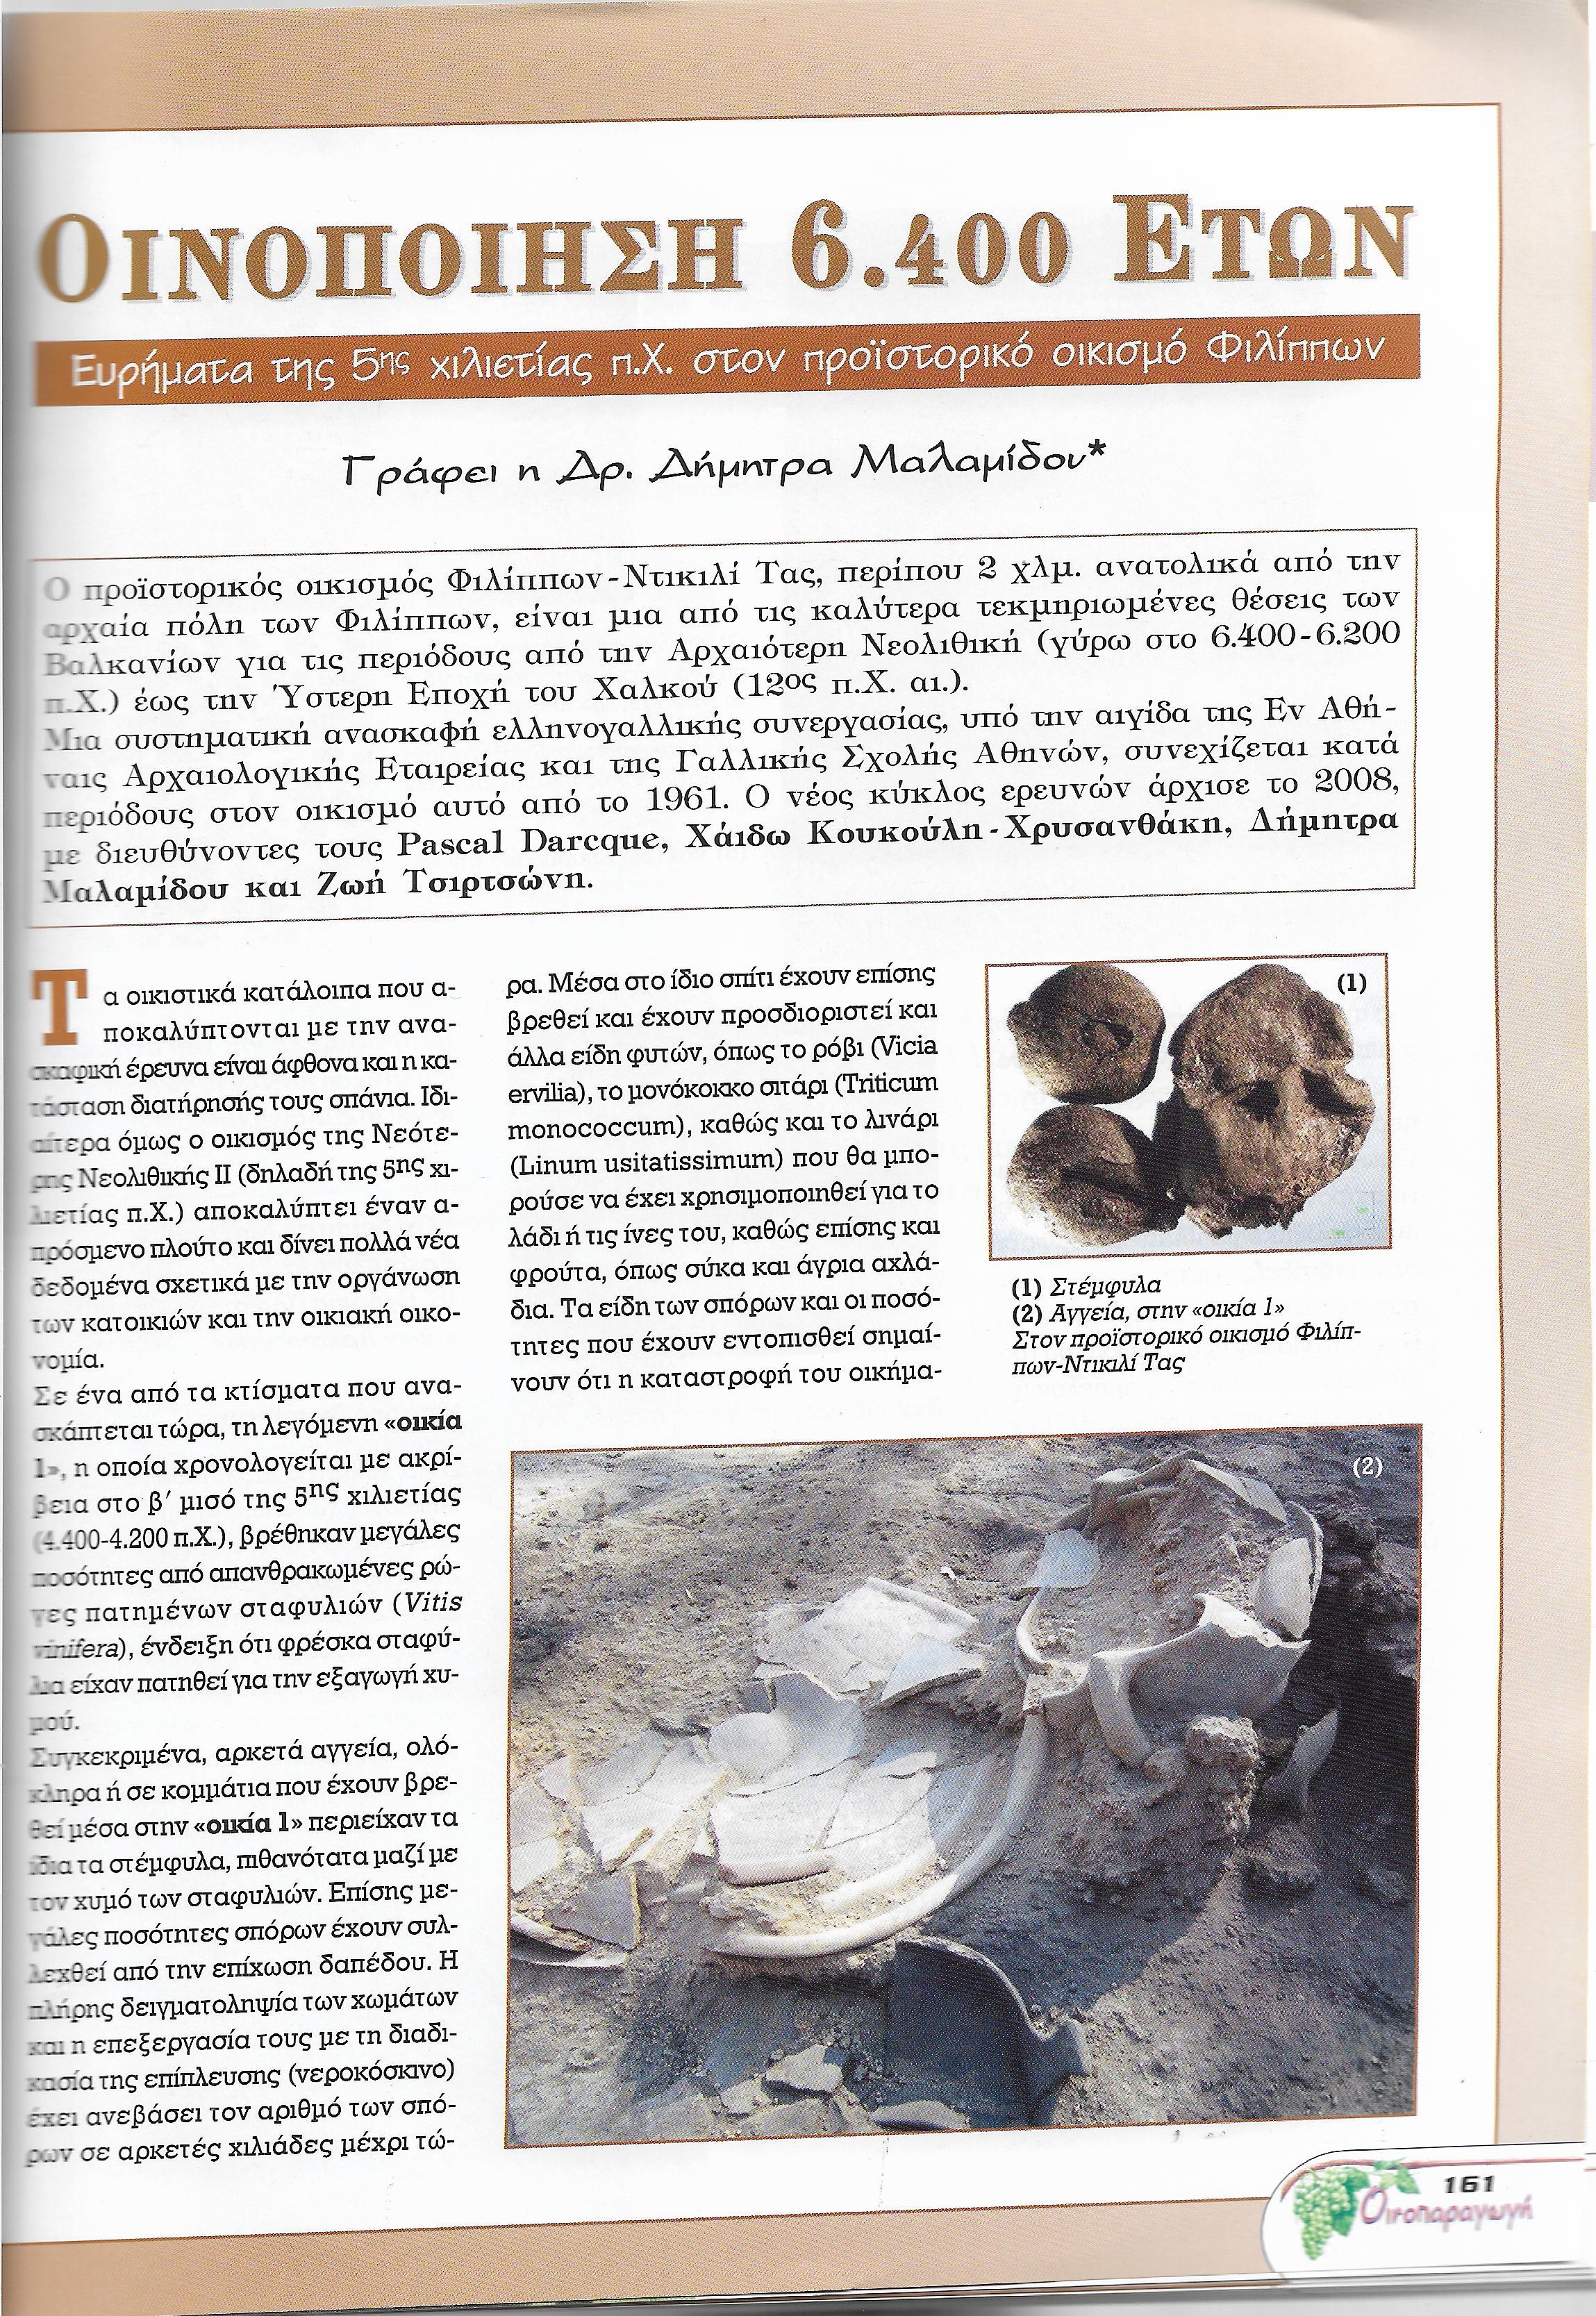 history of wine, 6400 years old in Greece and other archaic wine places in Greek Thrace